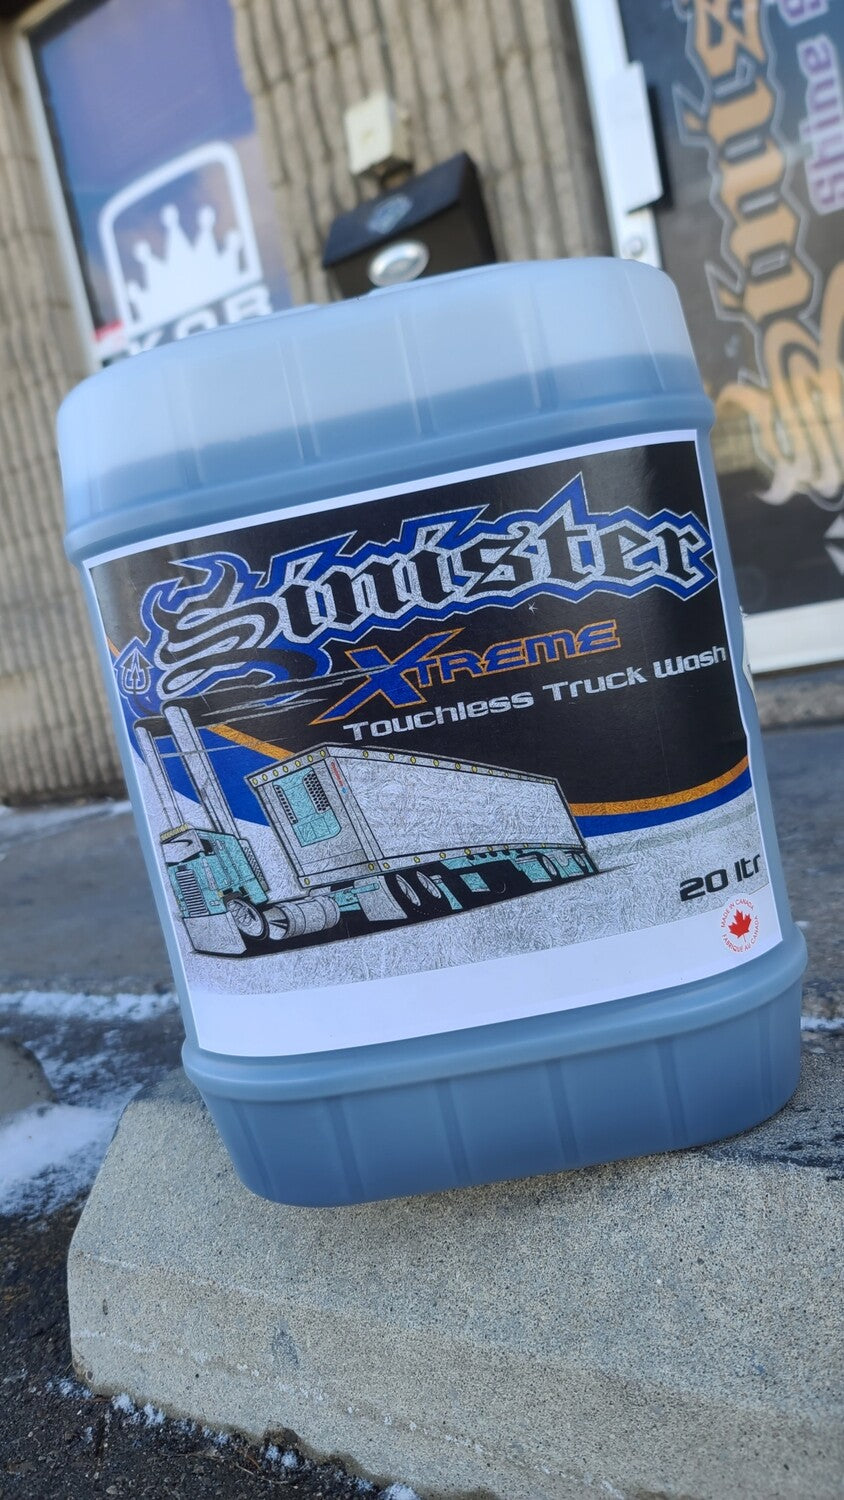 Sinister Xtreme Truck Wash soap 5 GAL TOTE